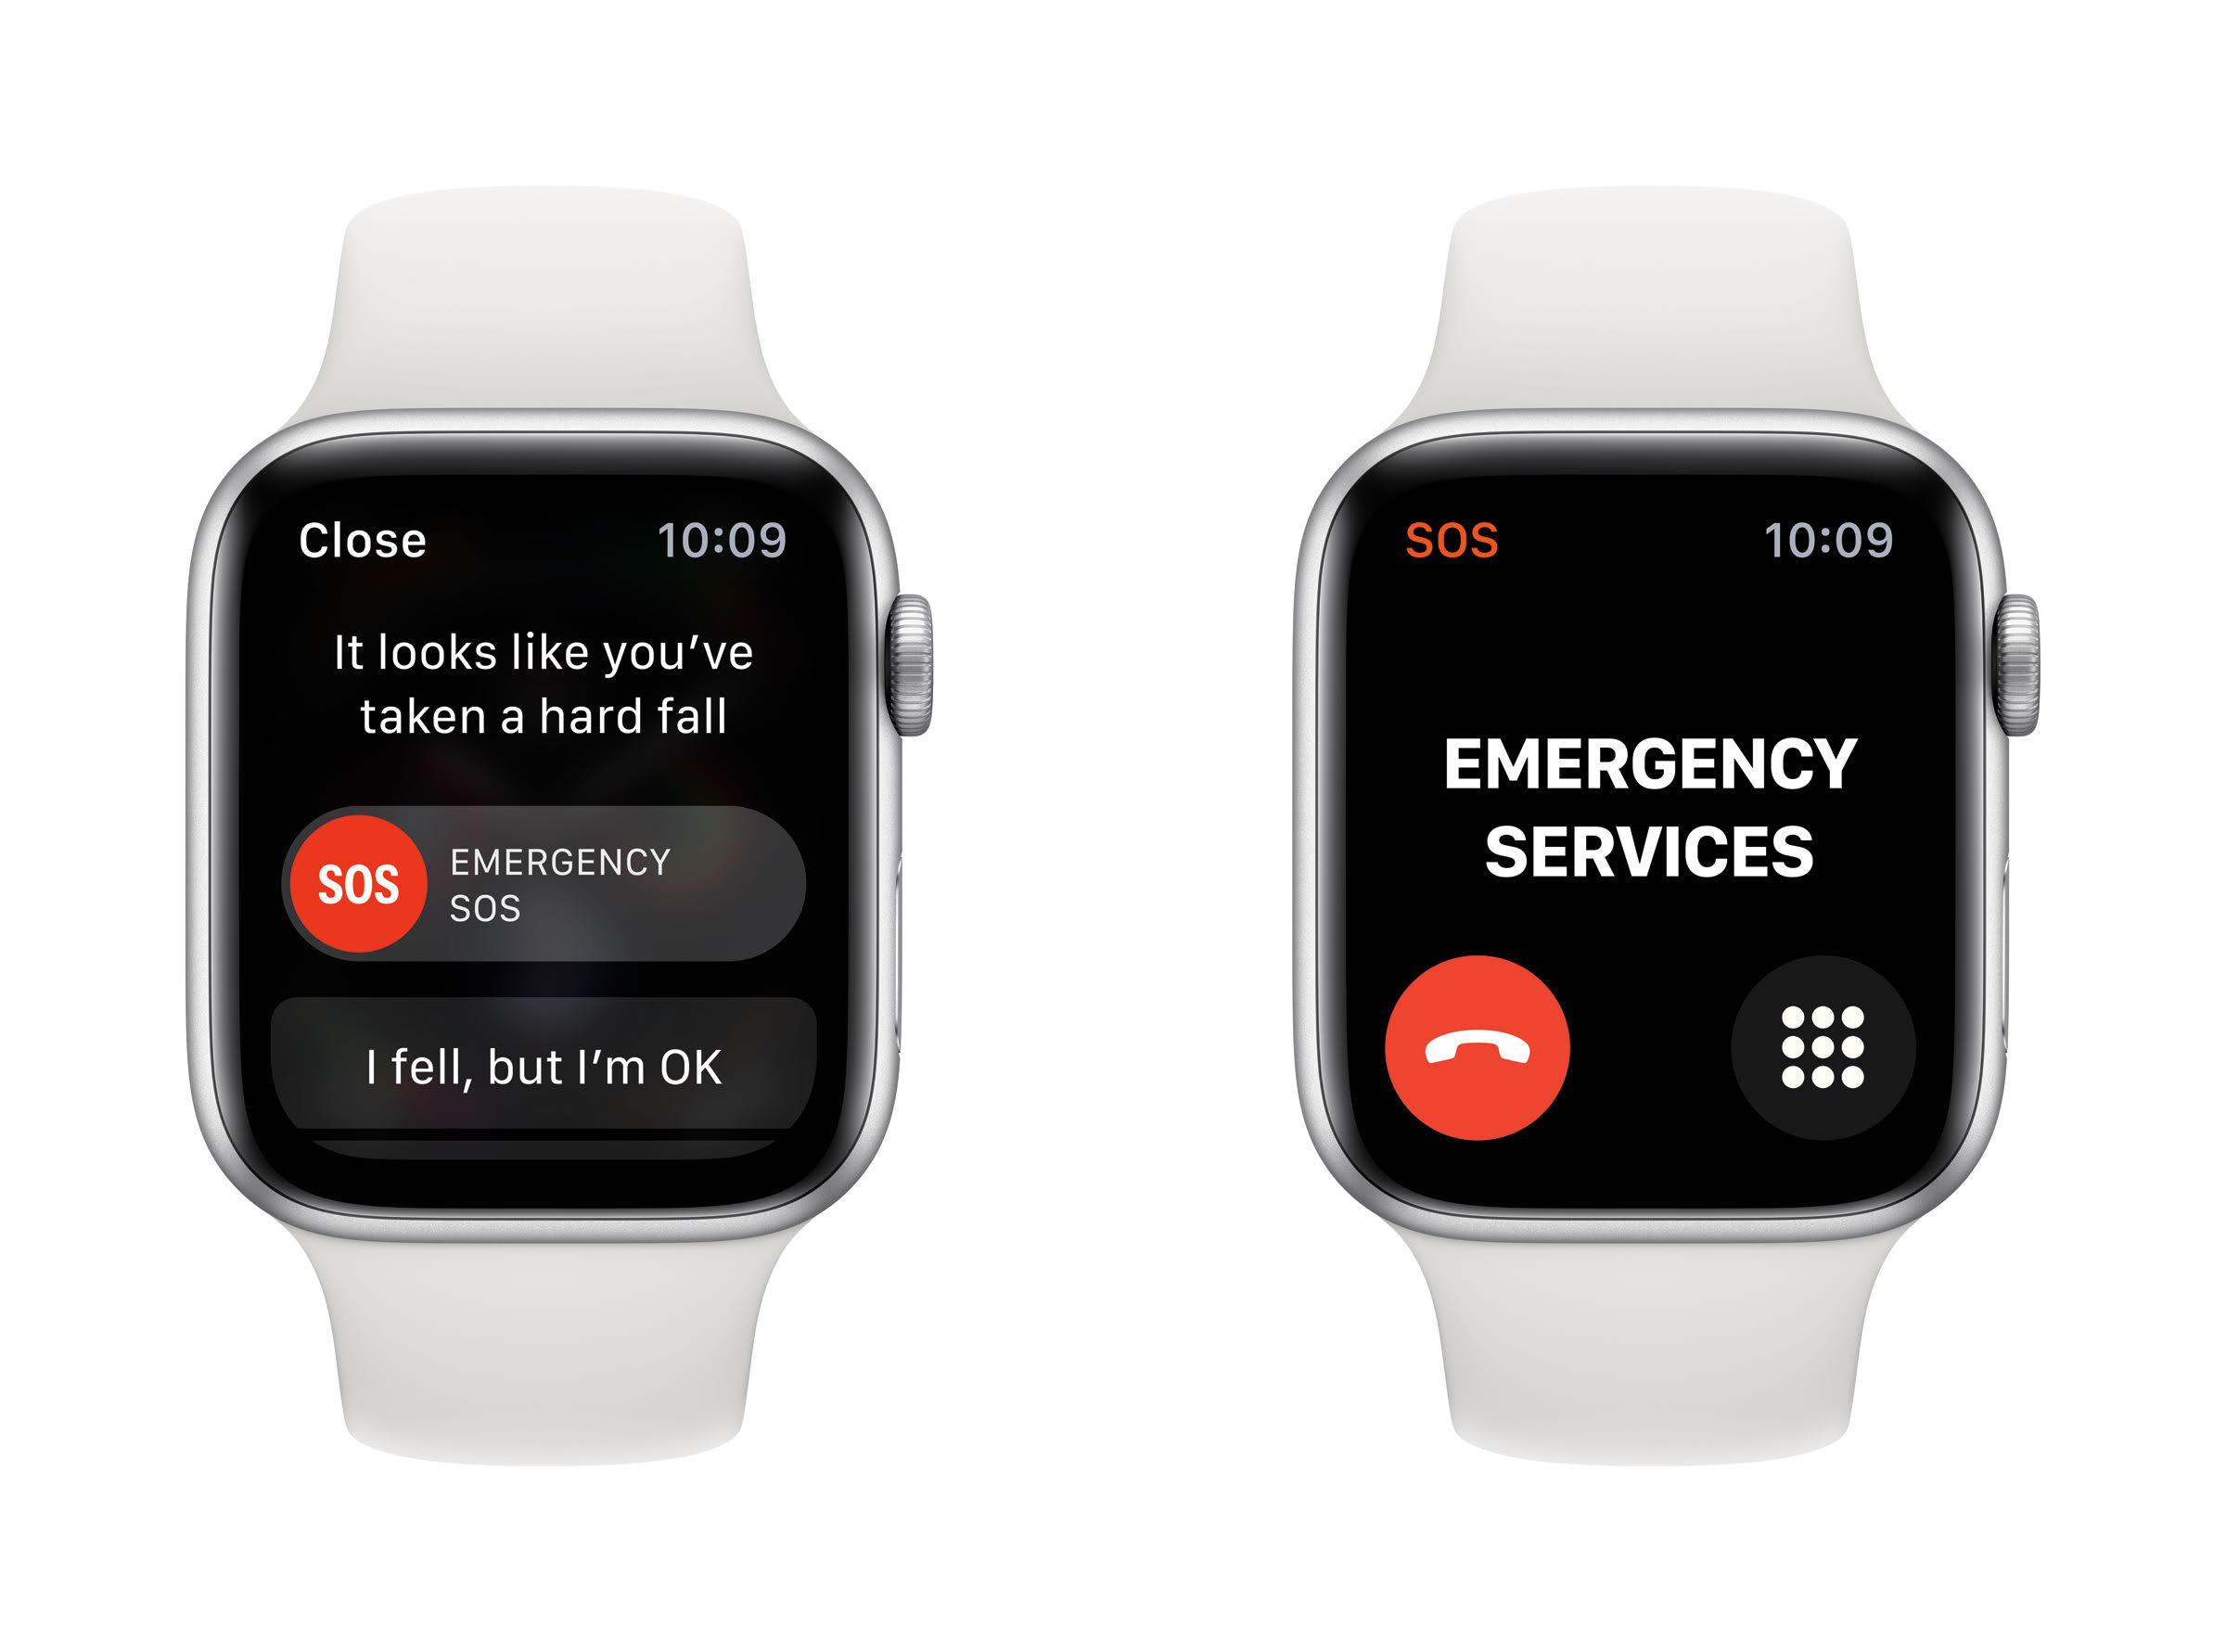 The Apple Watch learned to detect falls using data from real human mishaps